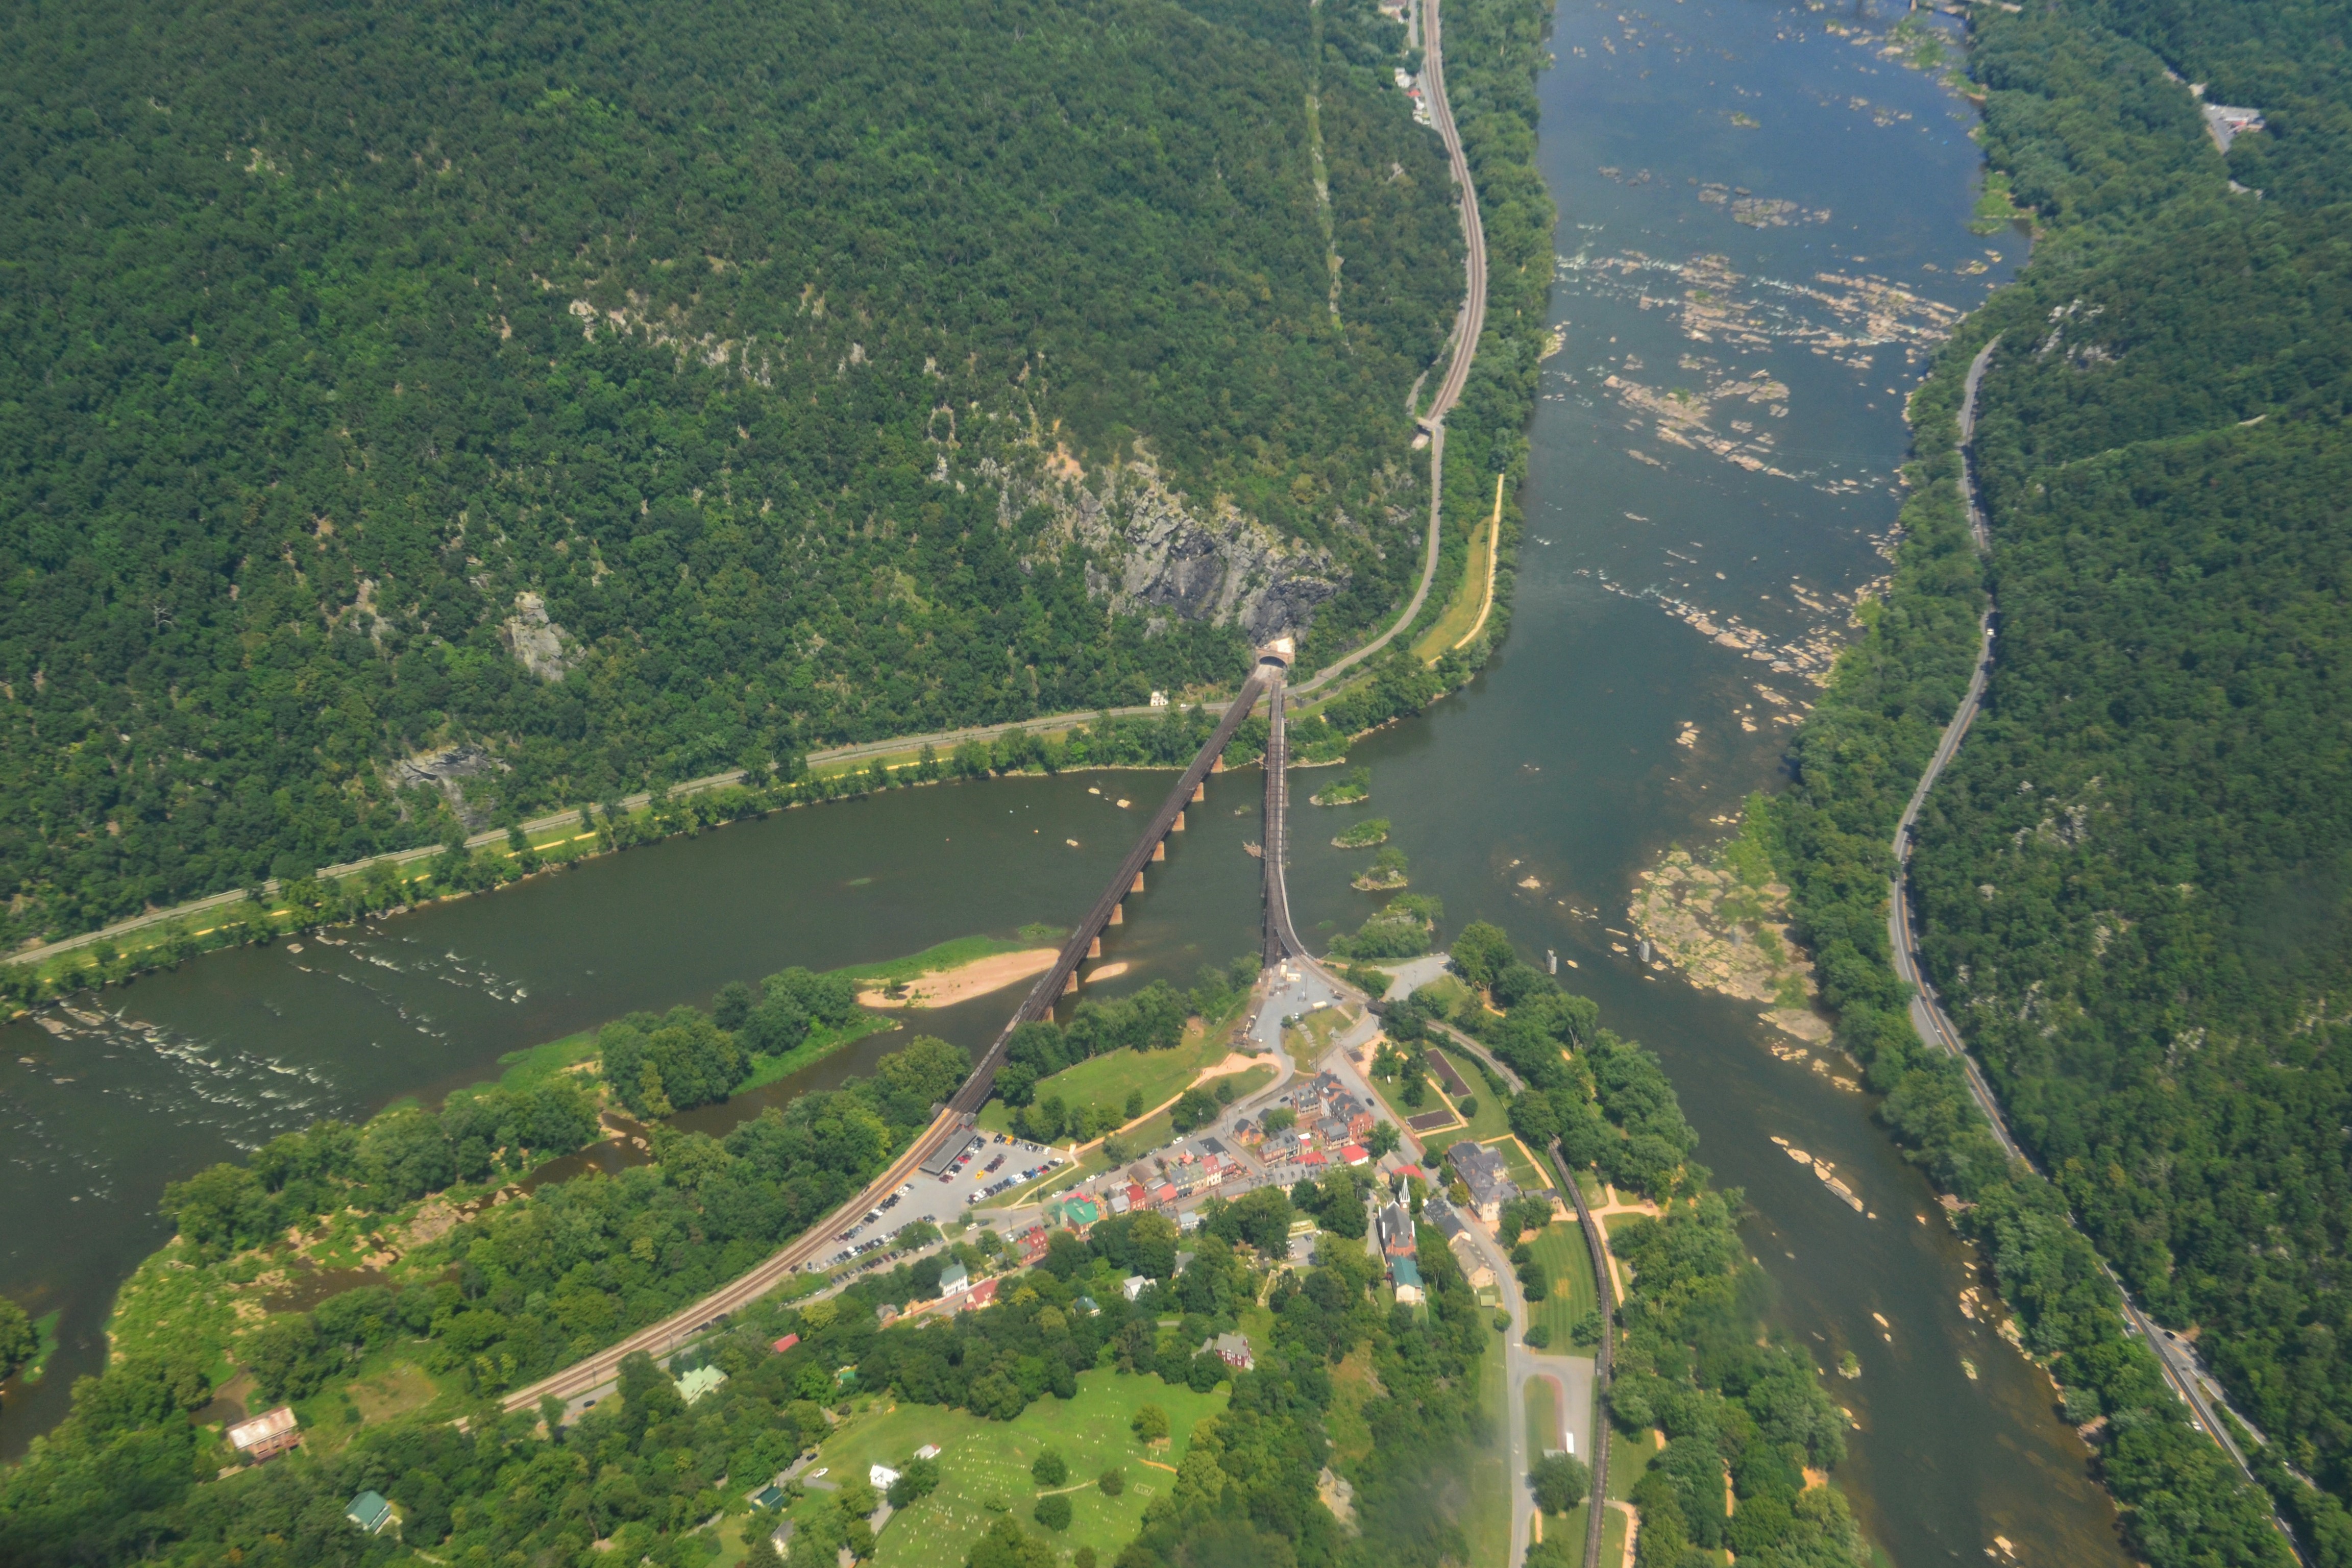 Aerial view of Lower Town Harpers Ferry